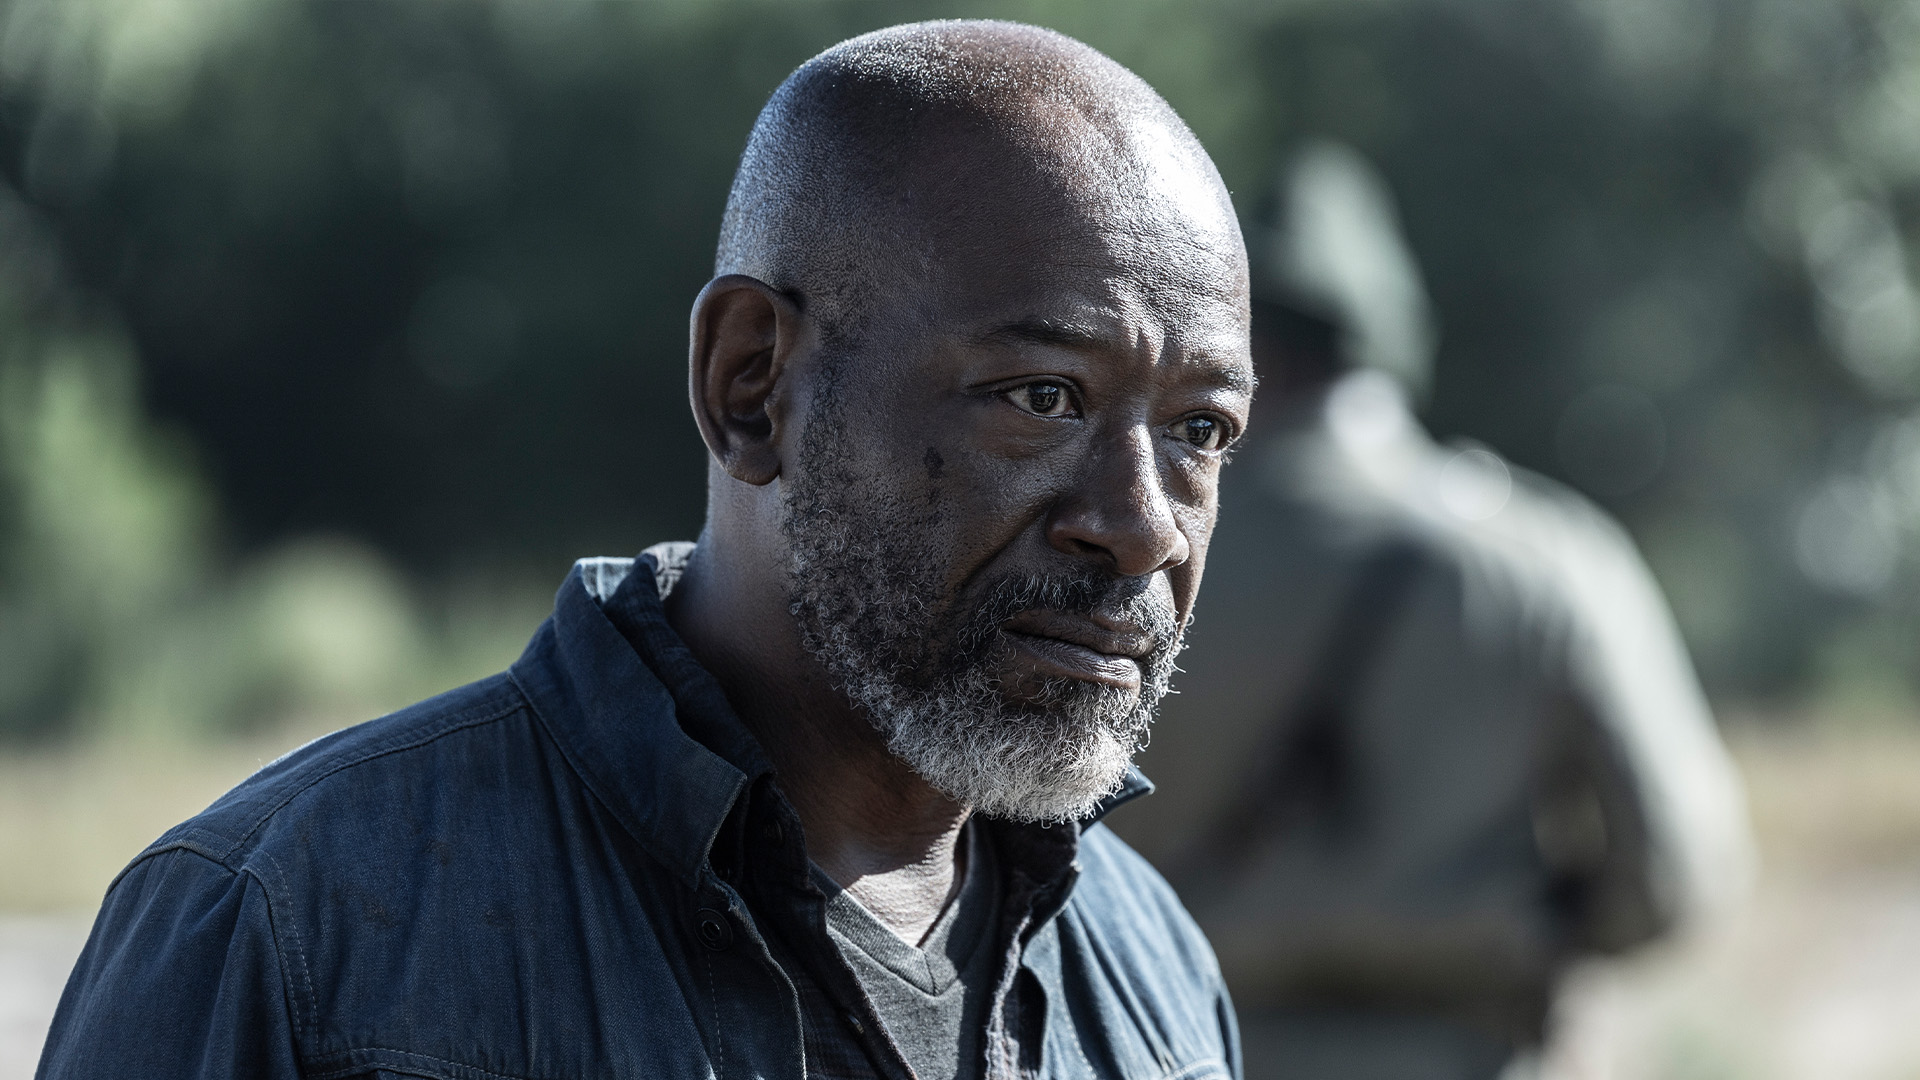 Fear the Walking Dead Season 8 Episode 6 - All I See is Red